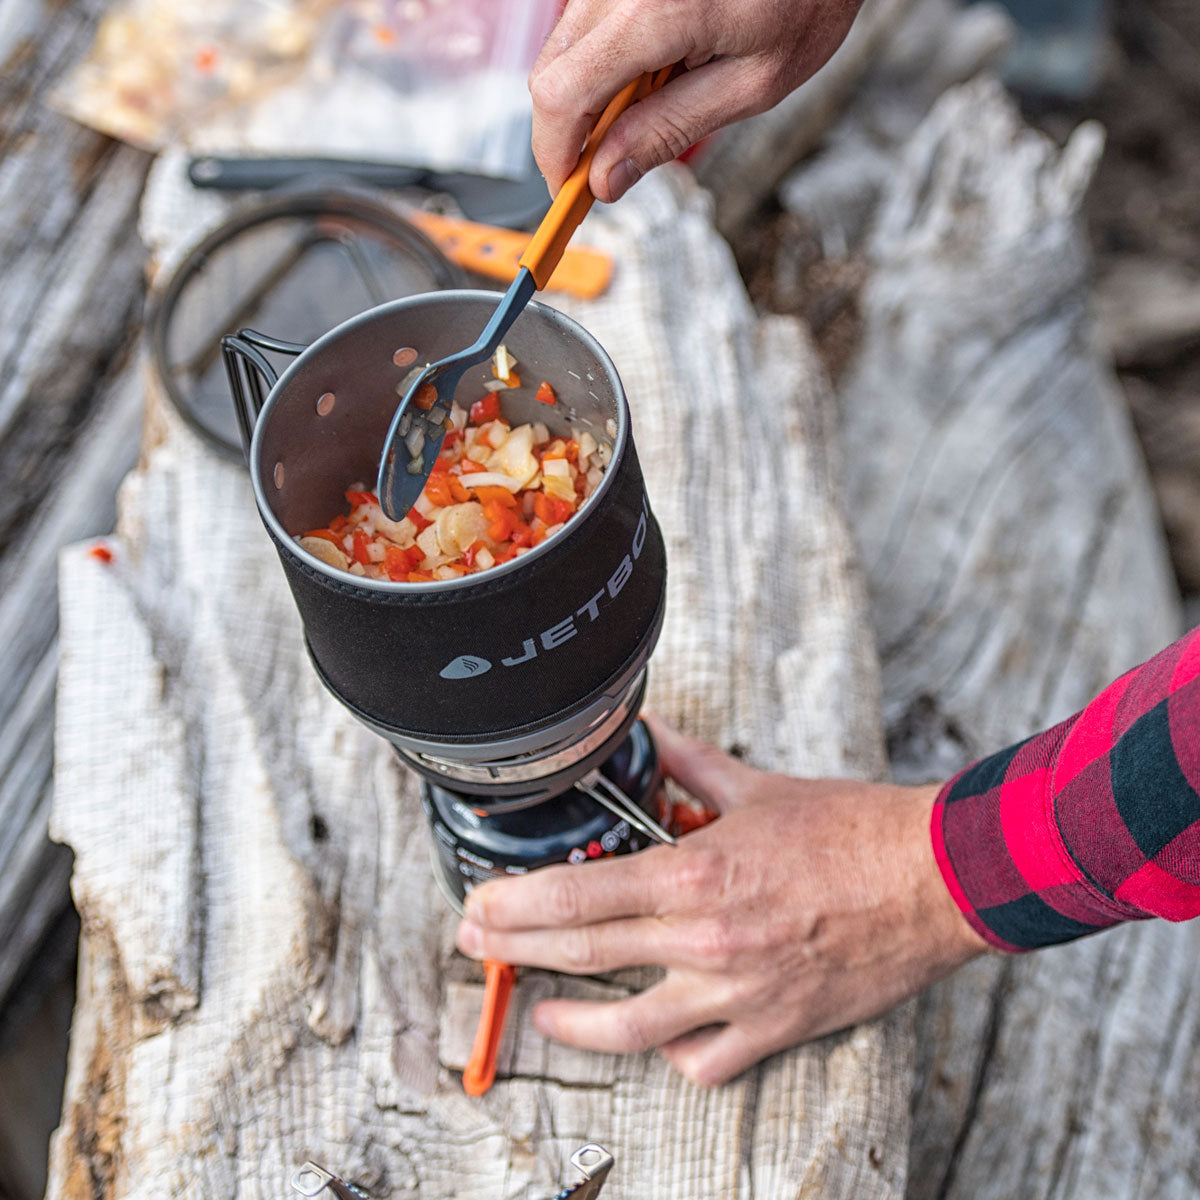 Jetboil MiniMo - Overland Outfitters - Vancouver, BC